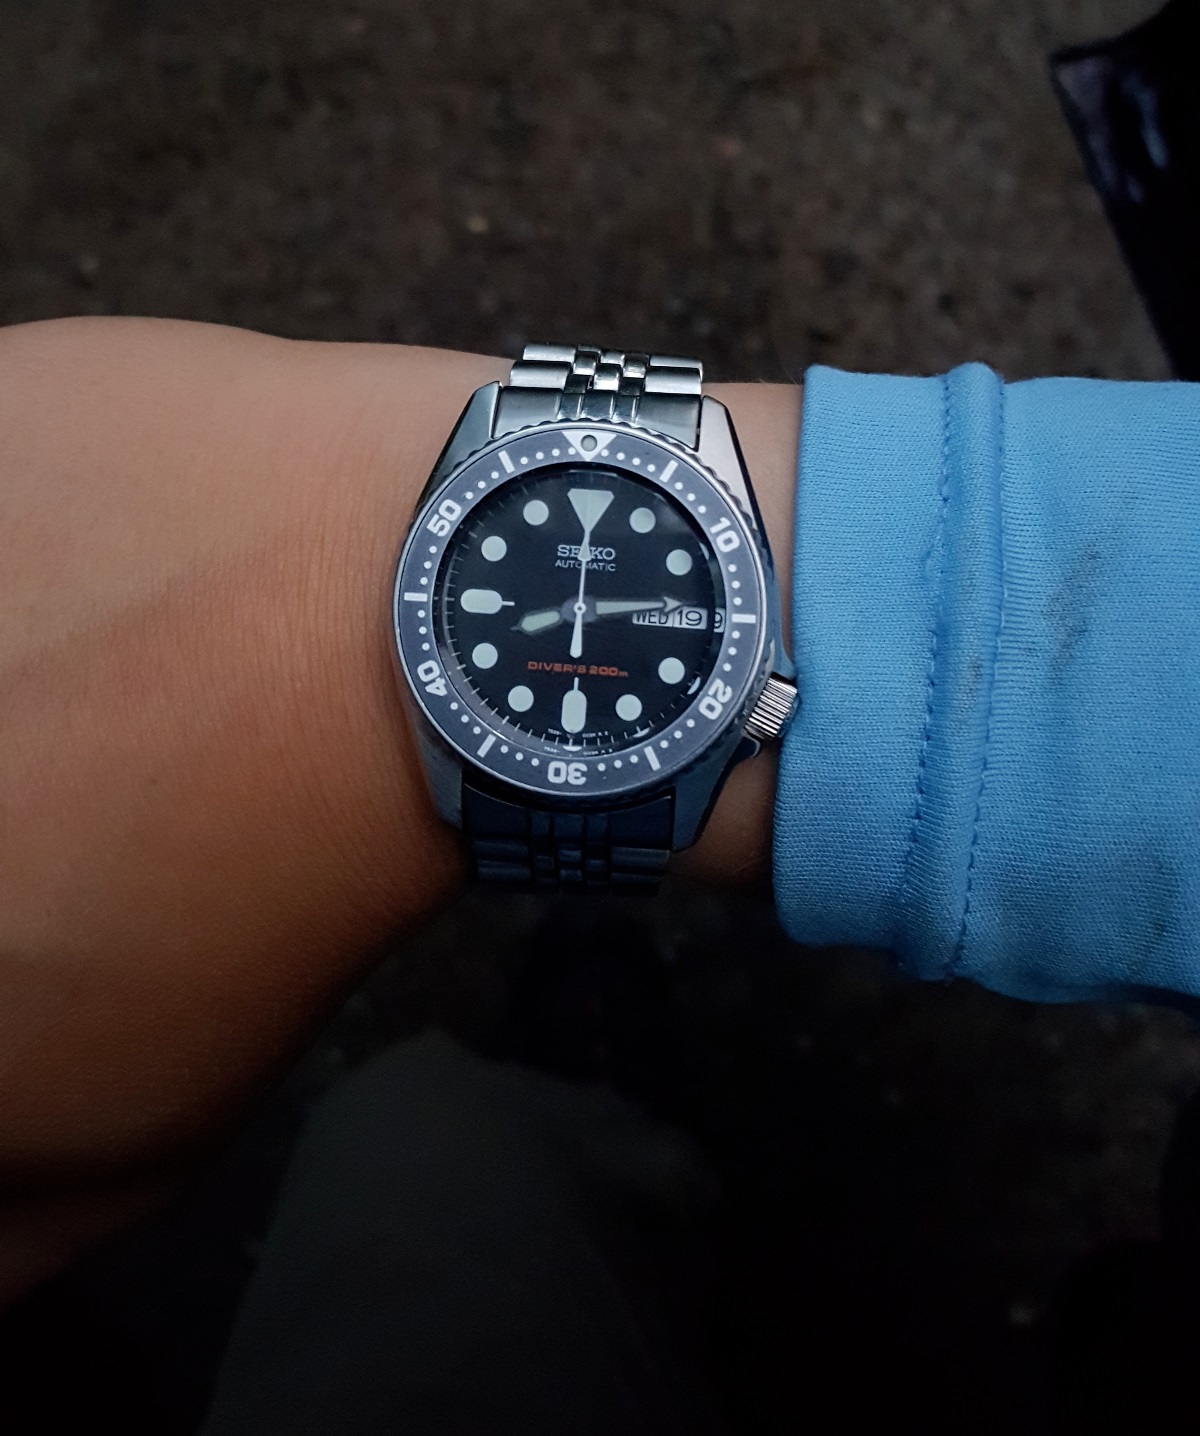 Review: Seiko SKX013 - Small diver with a big punch